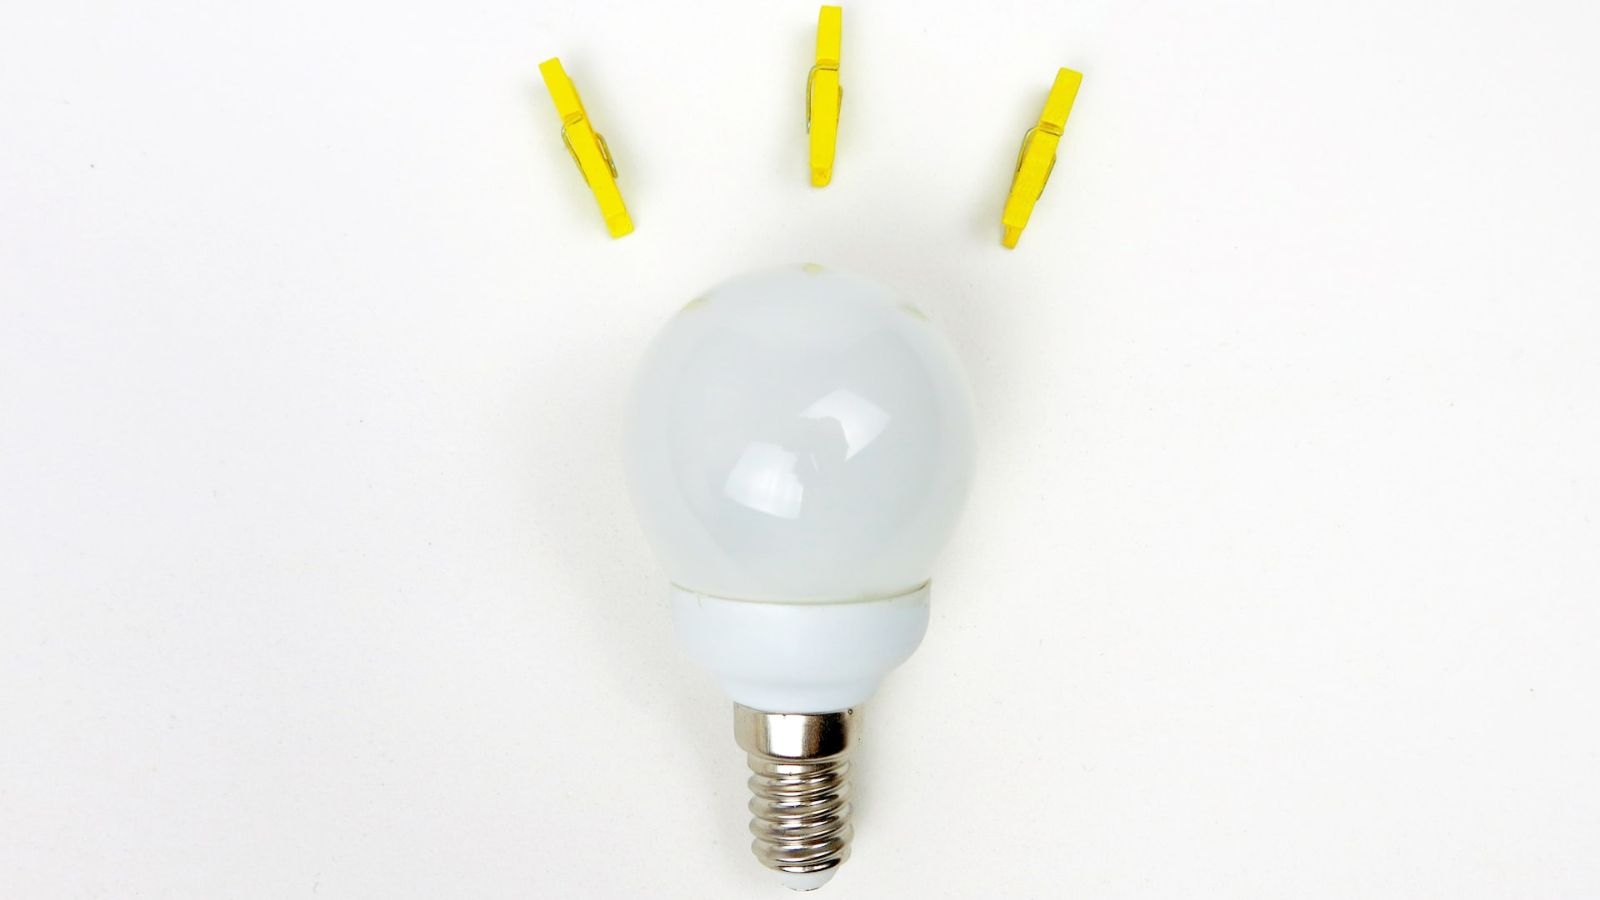 lightbulb with yellow clothespins on top